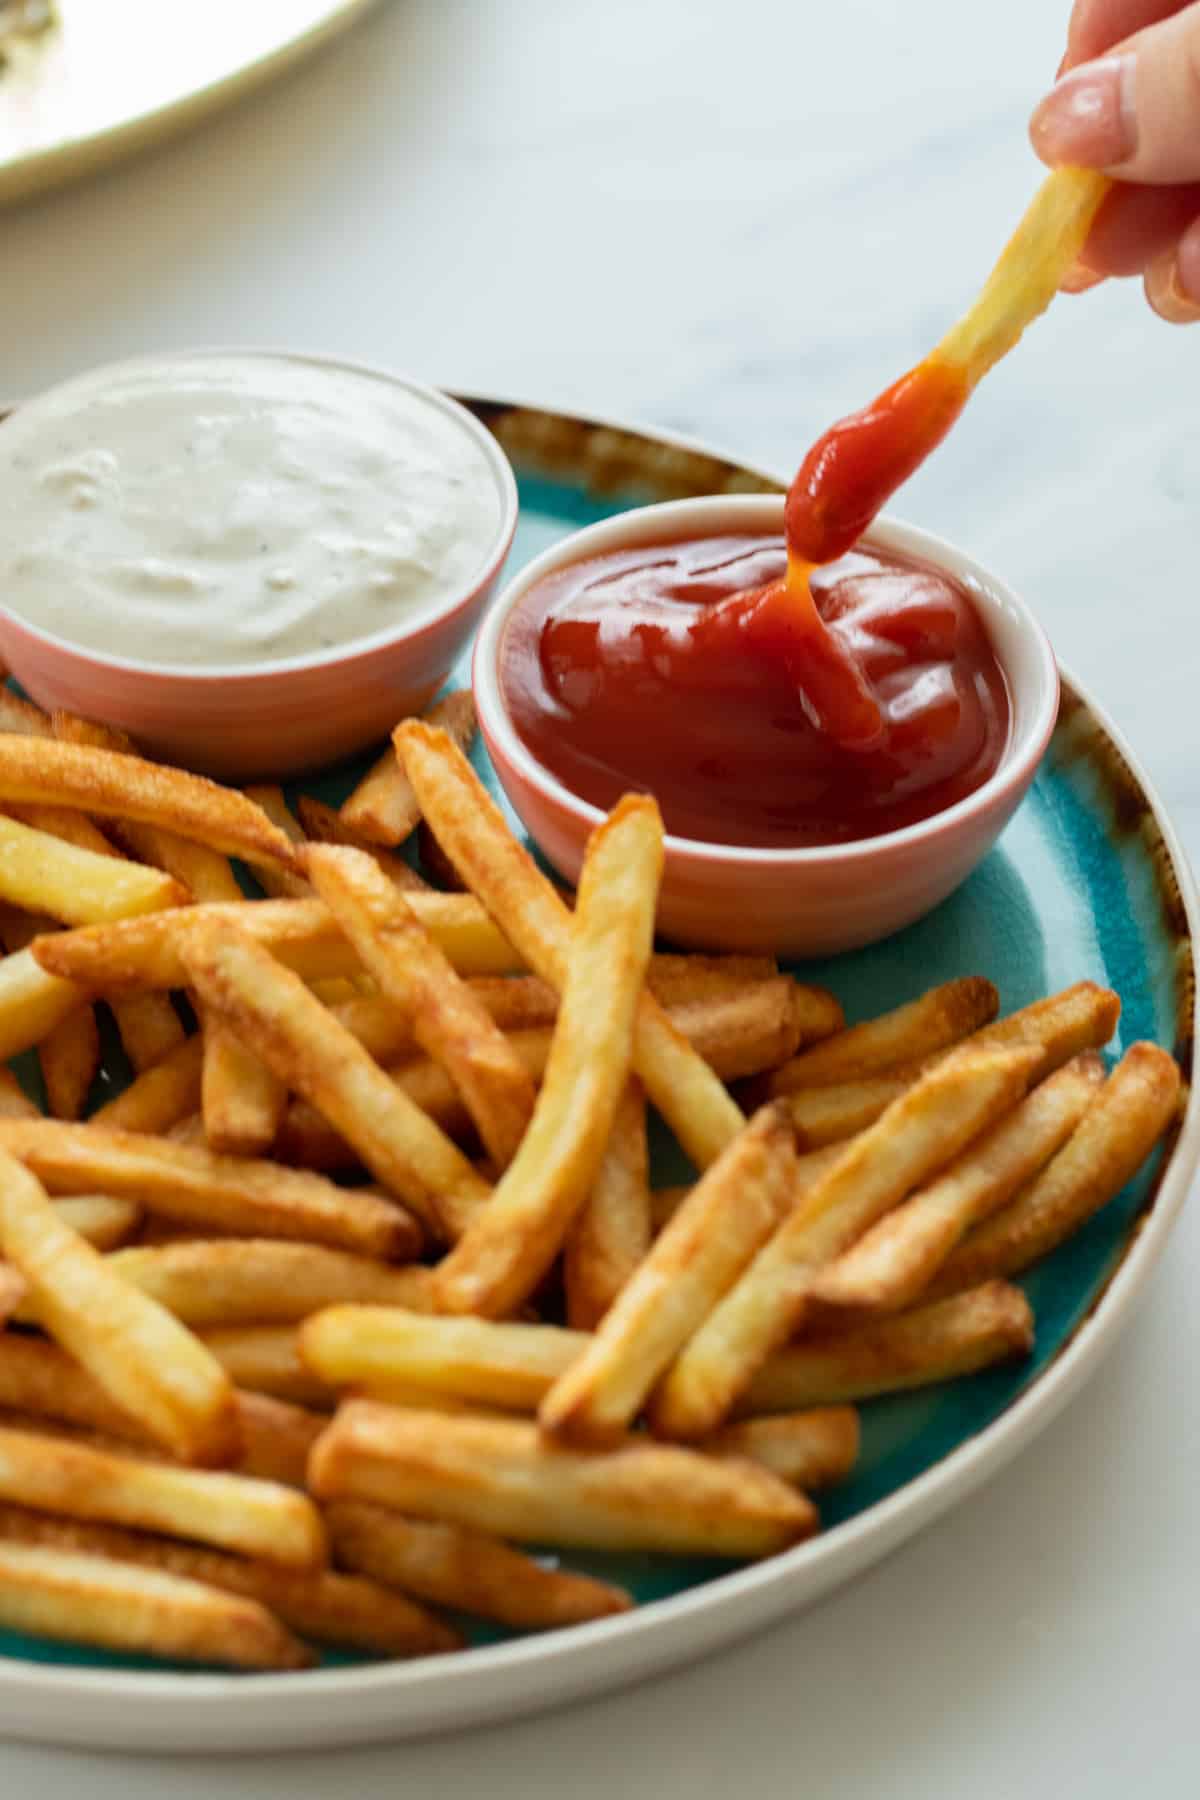 a french fry being dipped in ketchup.